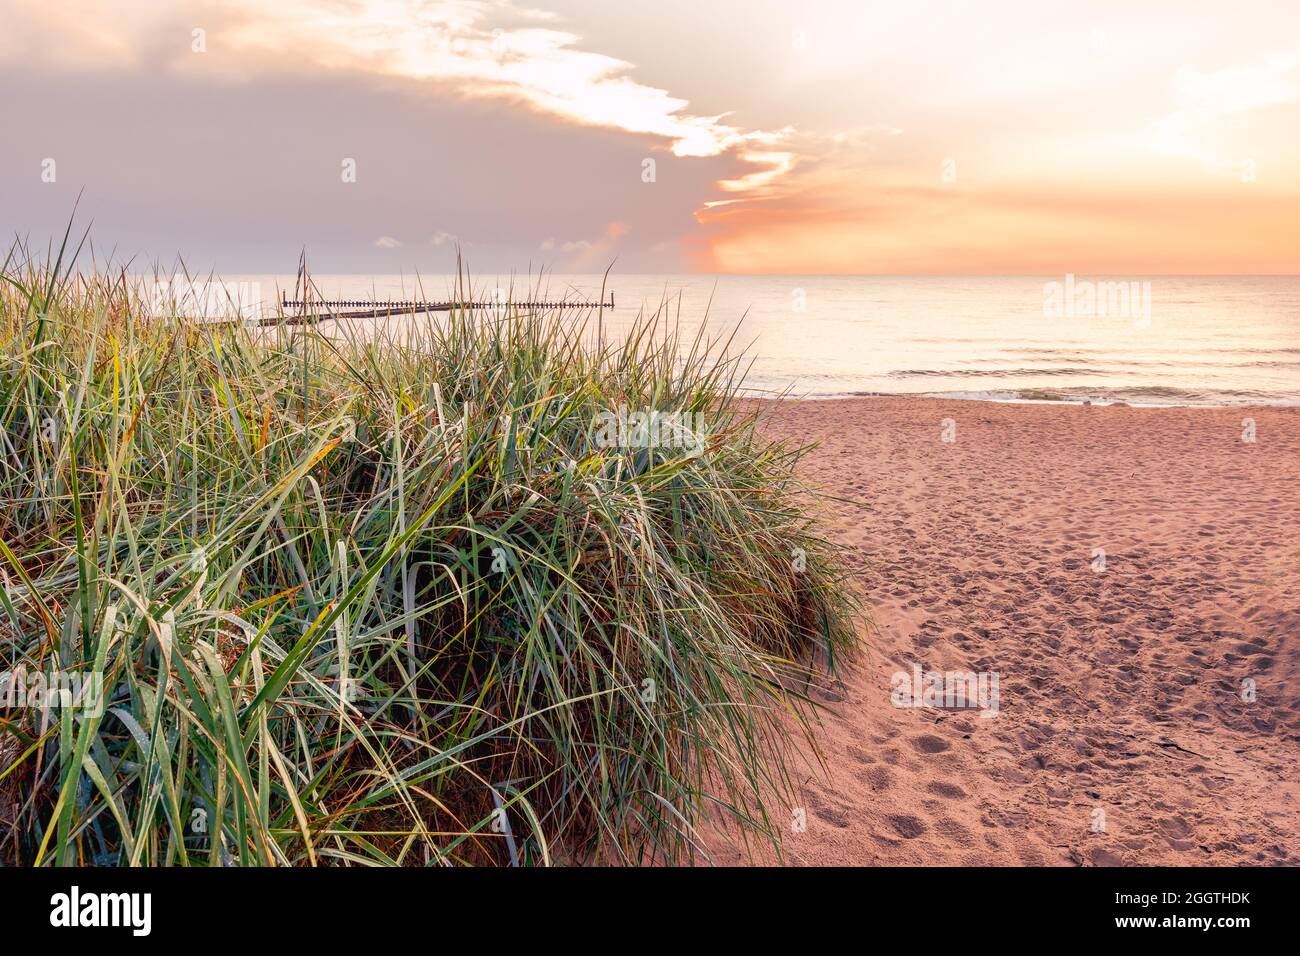 Entrance to a beautiful, empty beach on the Baltic Sea, sandy beach and tall grass in the foreground, setting sun in the background Stock Photo